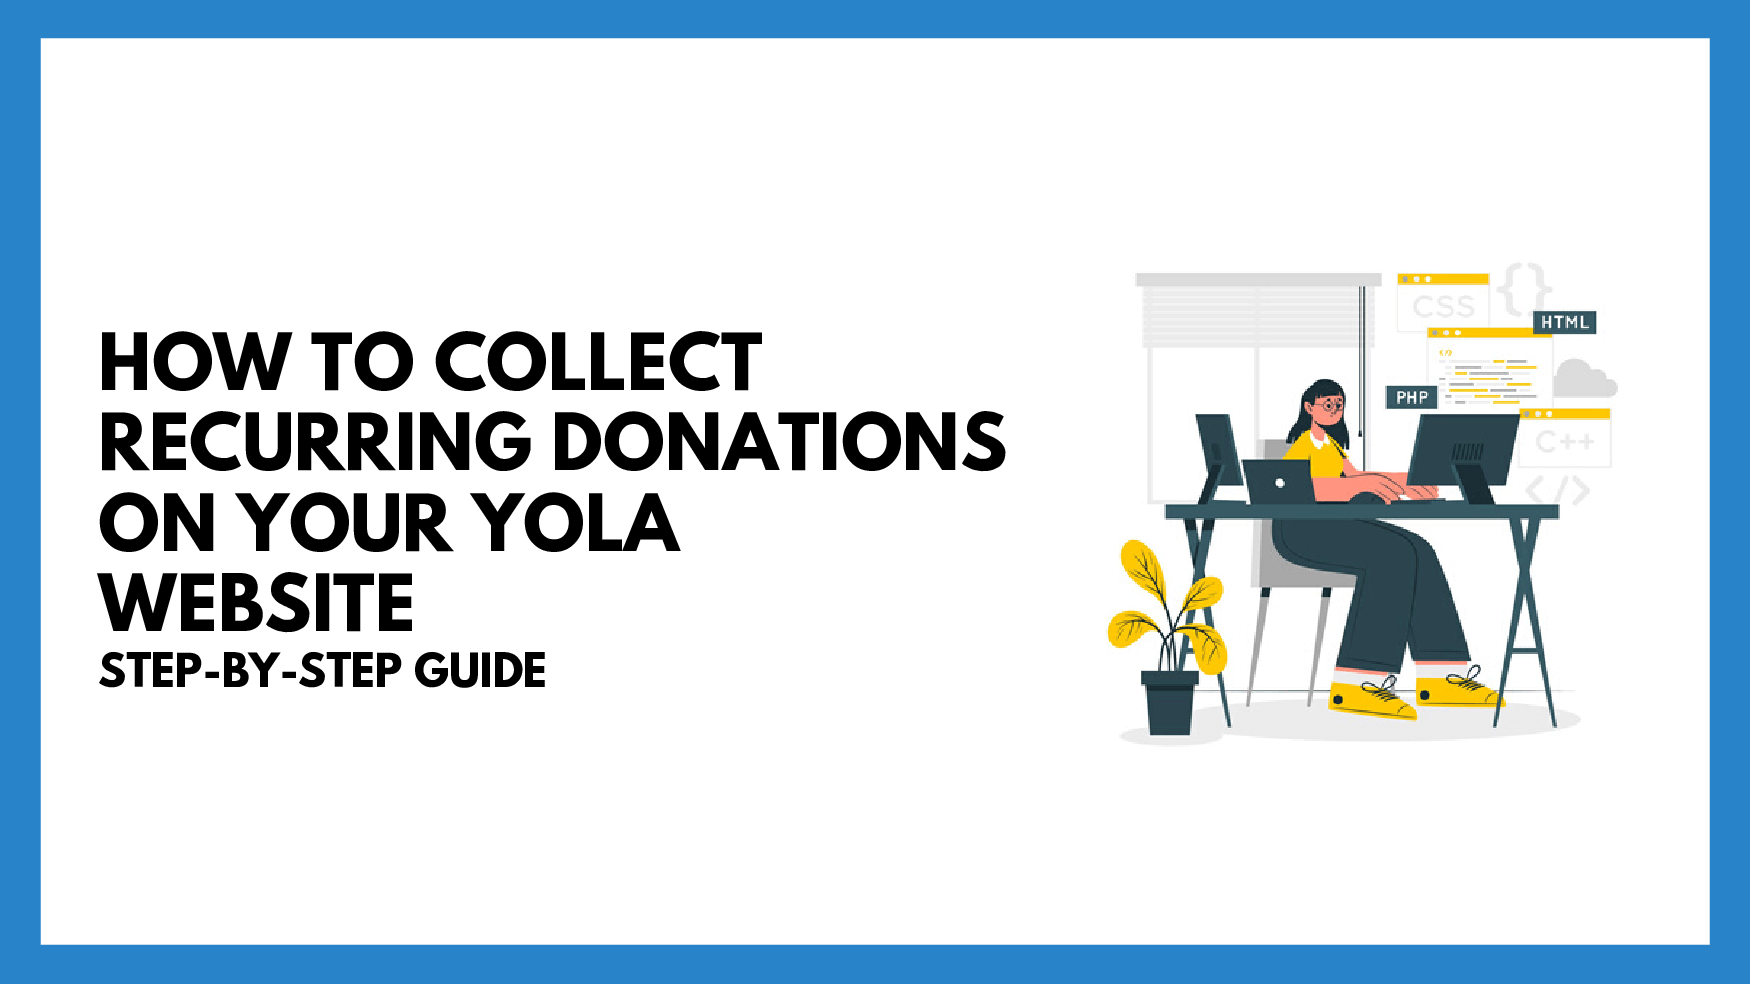 How To Collect Recurring Donations On Your Yola Website